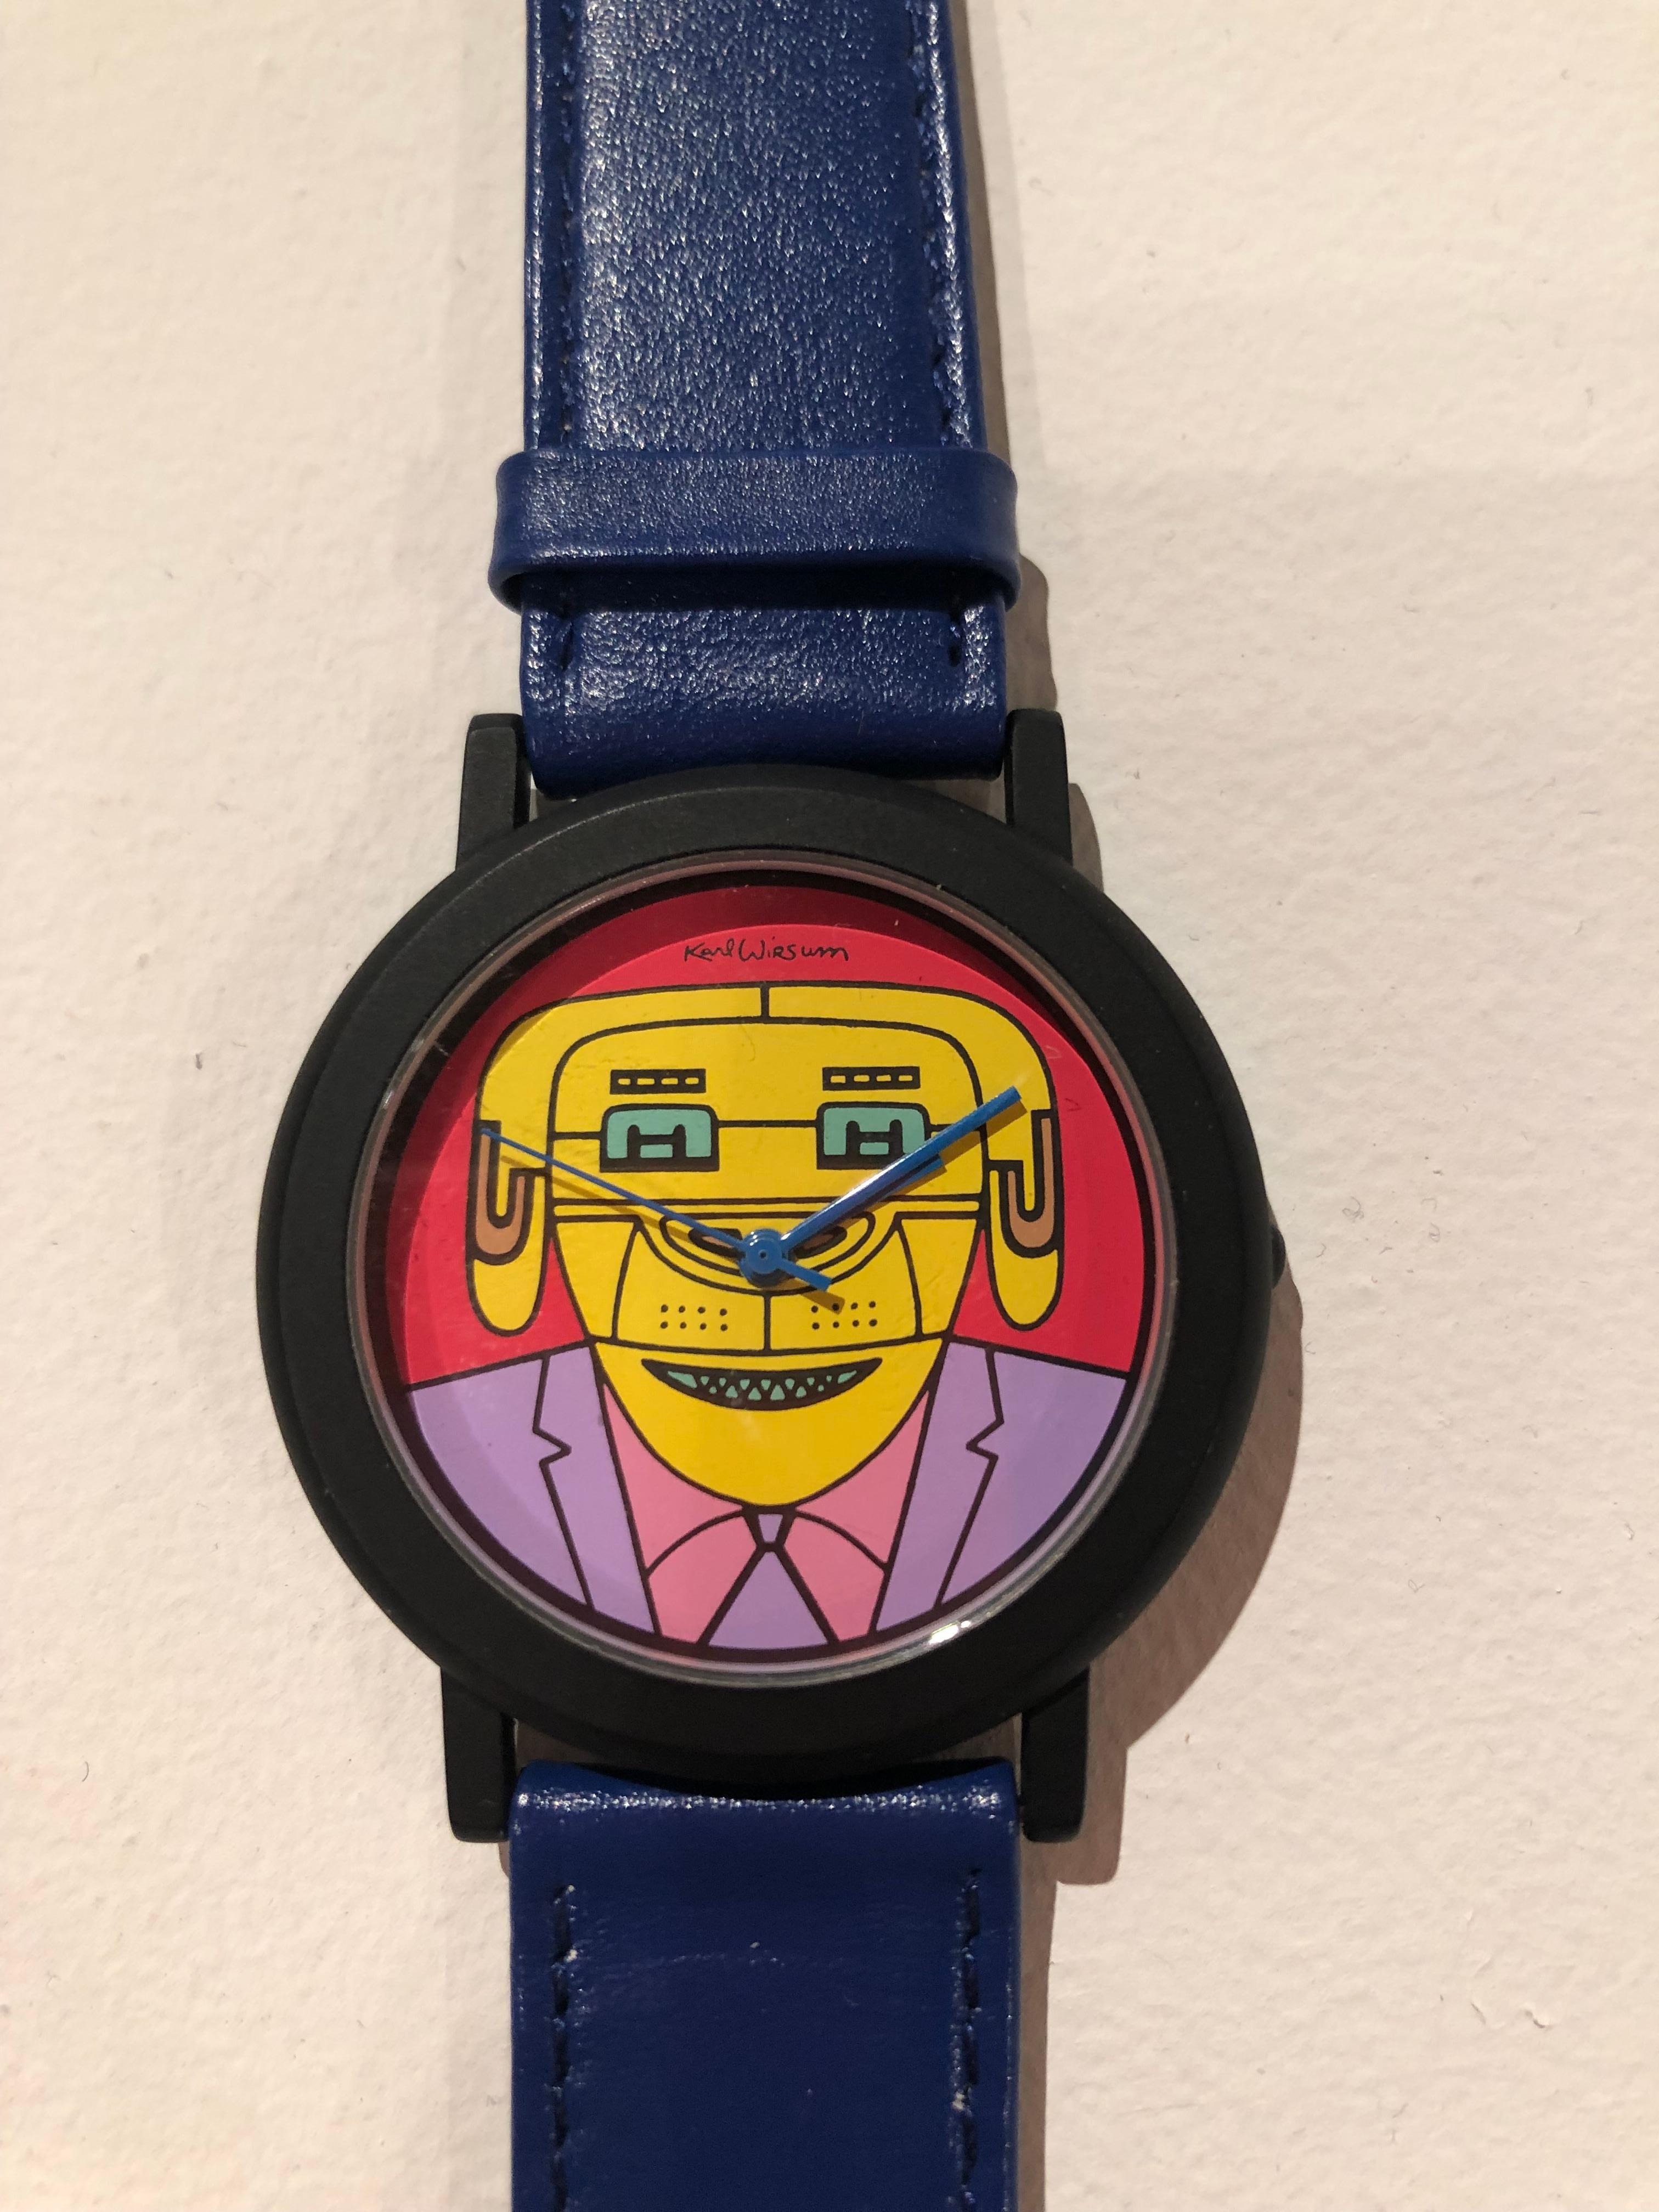 Rare and authentic collectible watches, designed by Hairy Who & Chicago Imagist artist Karl Wirsum for Playboy Magazine.
Made in 1991, buyer can choose between genuine leather watch band in black or navy.
Please make sure to specify band color when